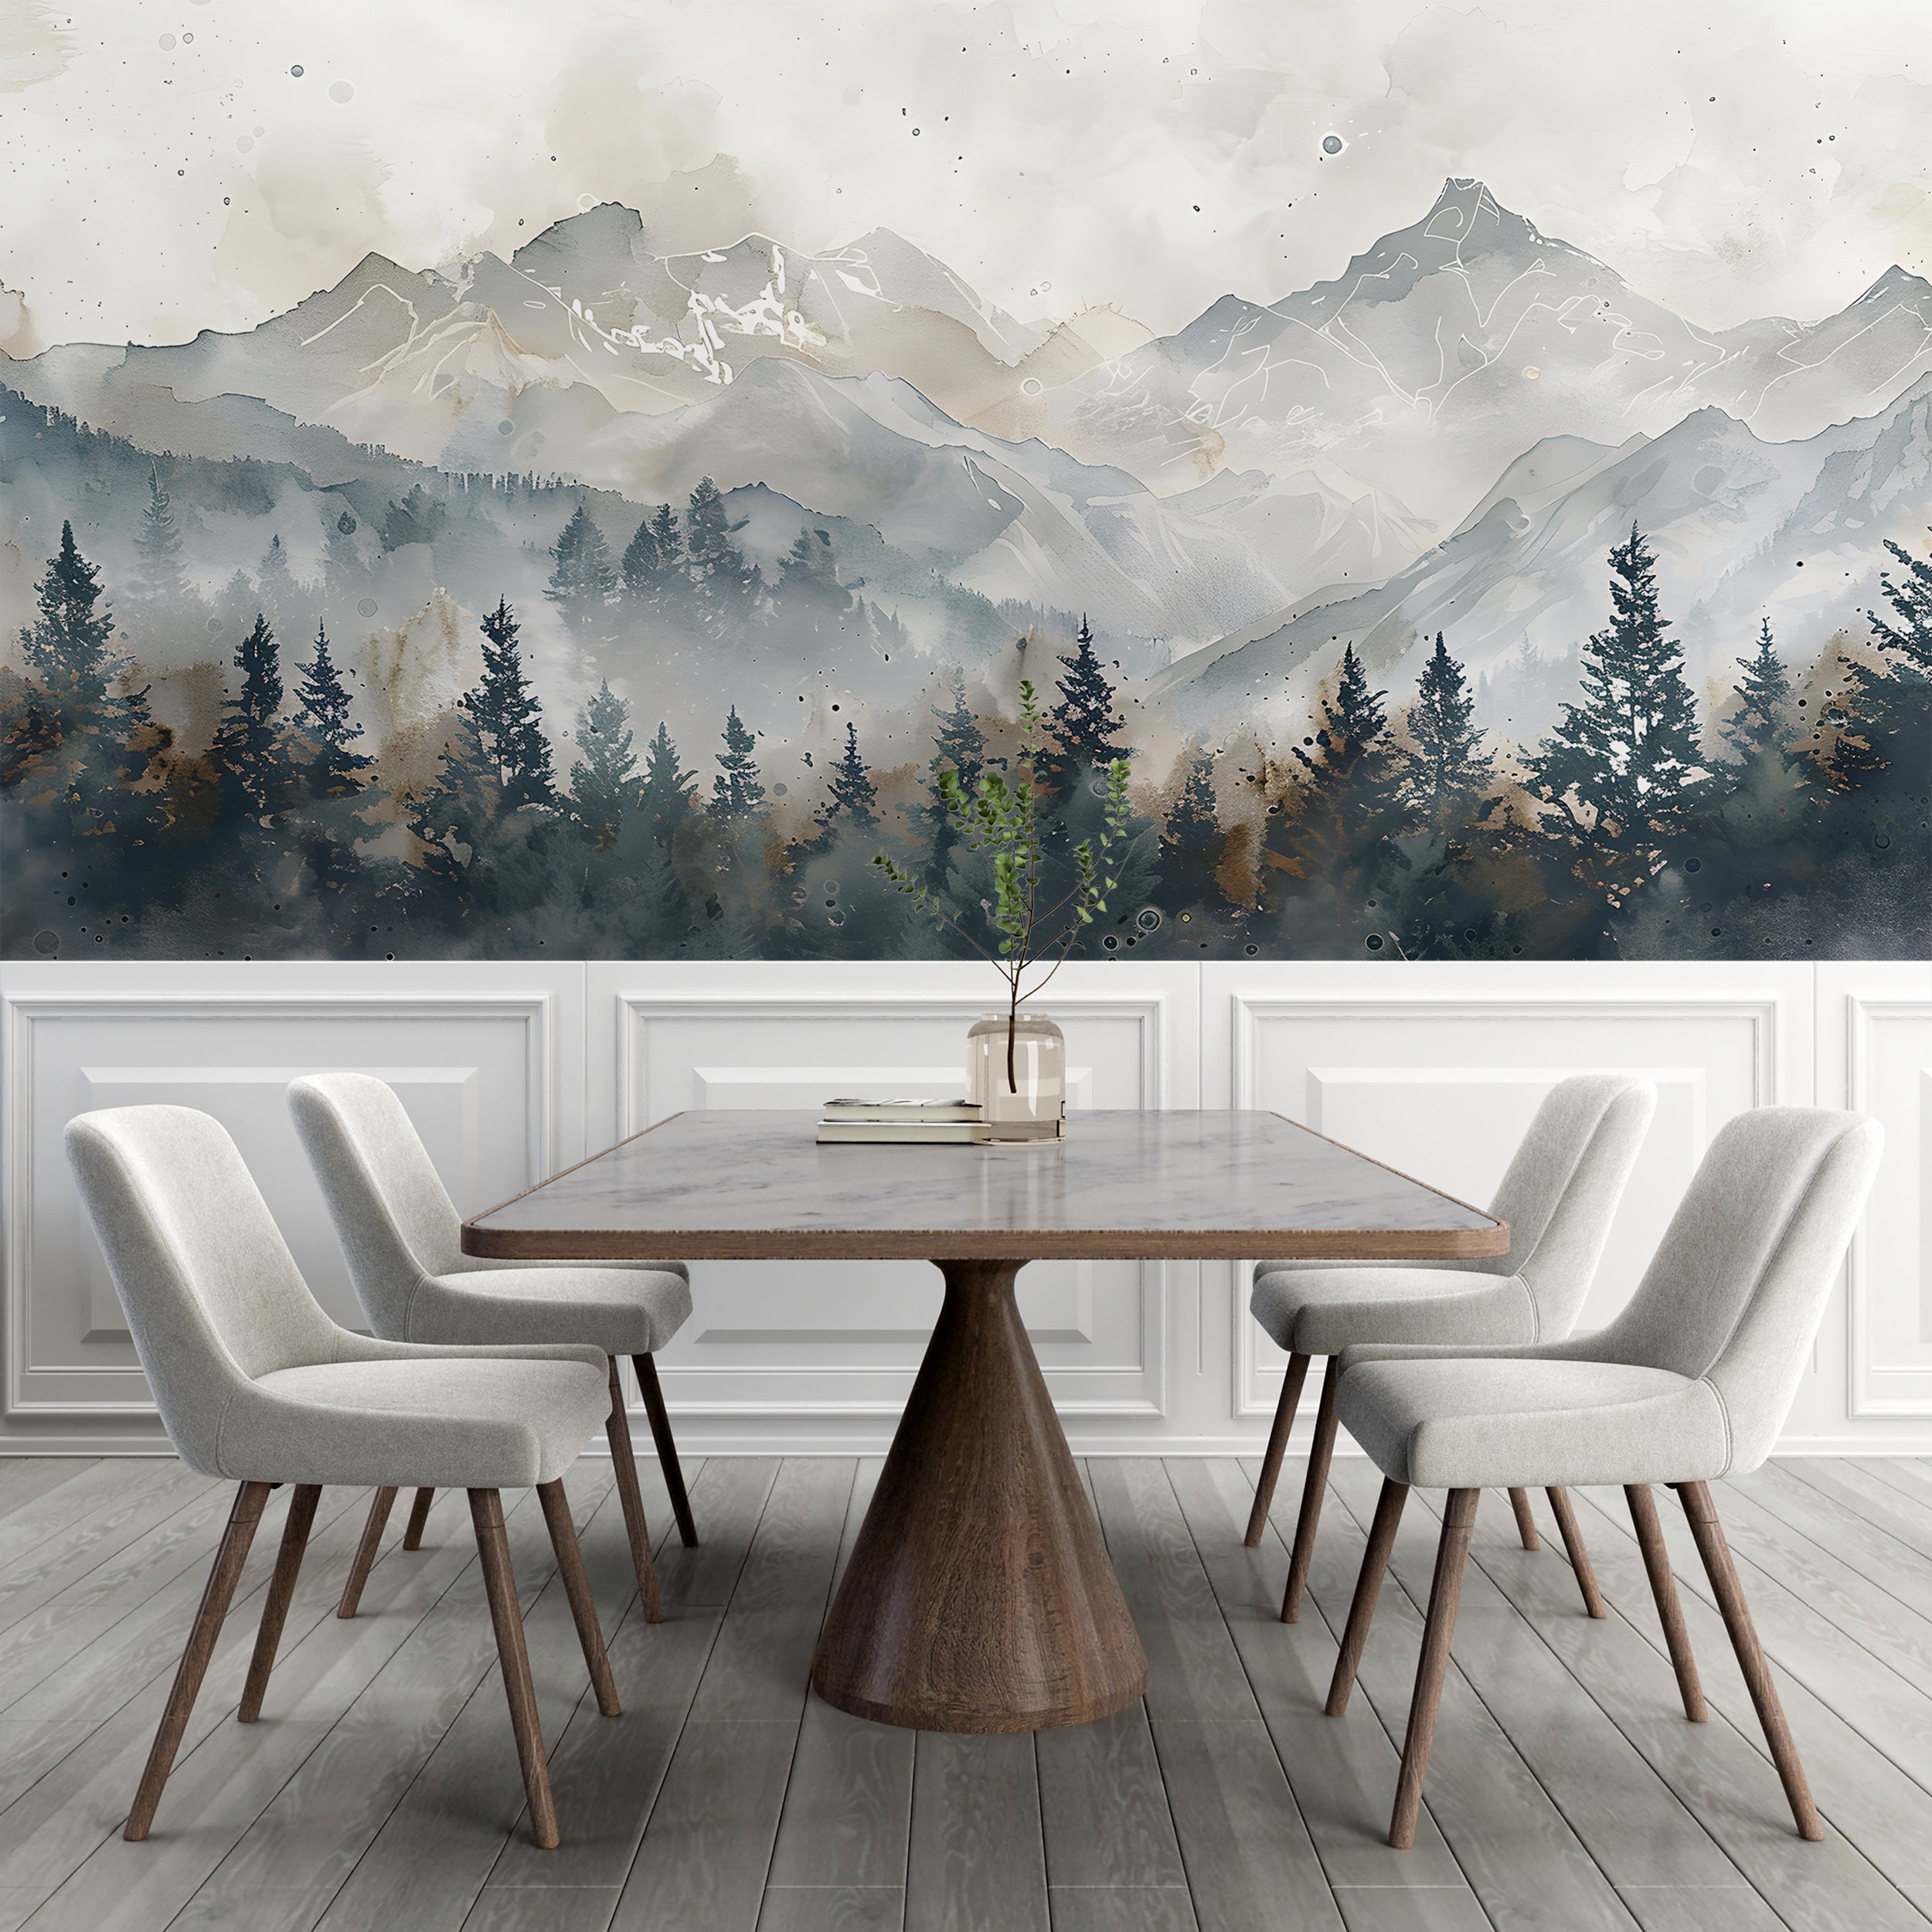 Forest and Mountains in Watercolor Style Mural, Grey Cloudy Mountain Landscape, Peel and Stick Pine Forest Natural Colors Wall Decor, Removable Wall Art